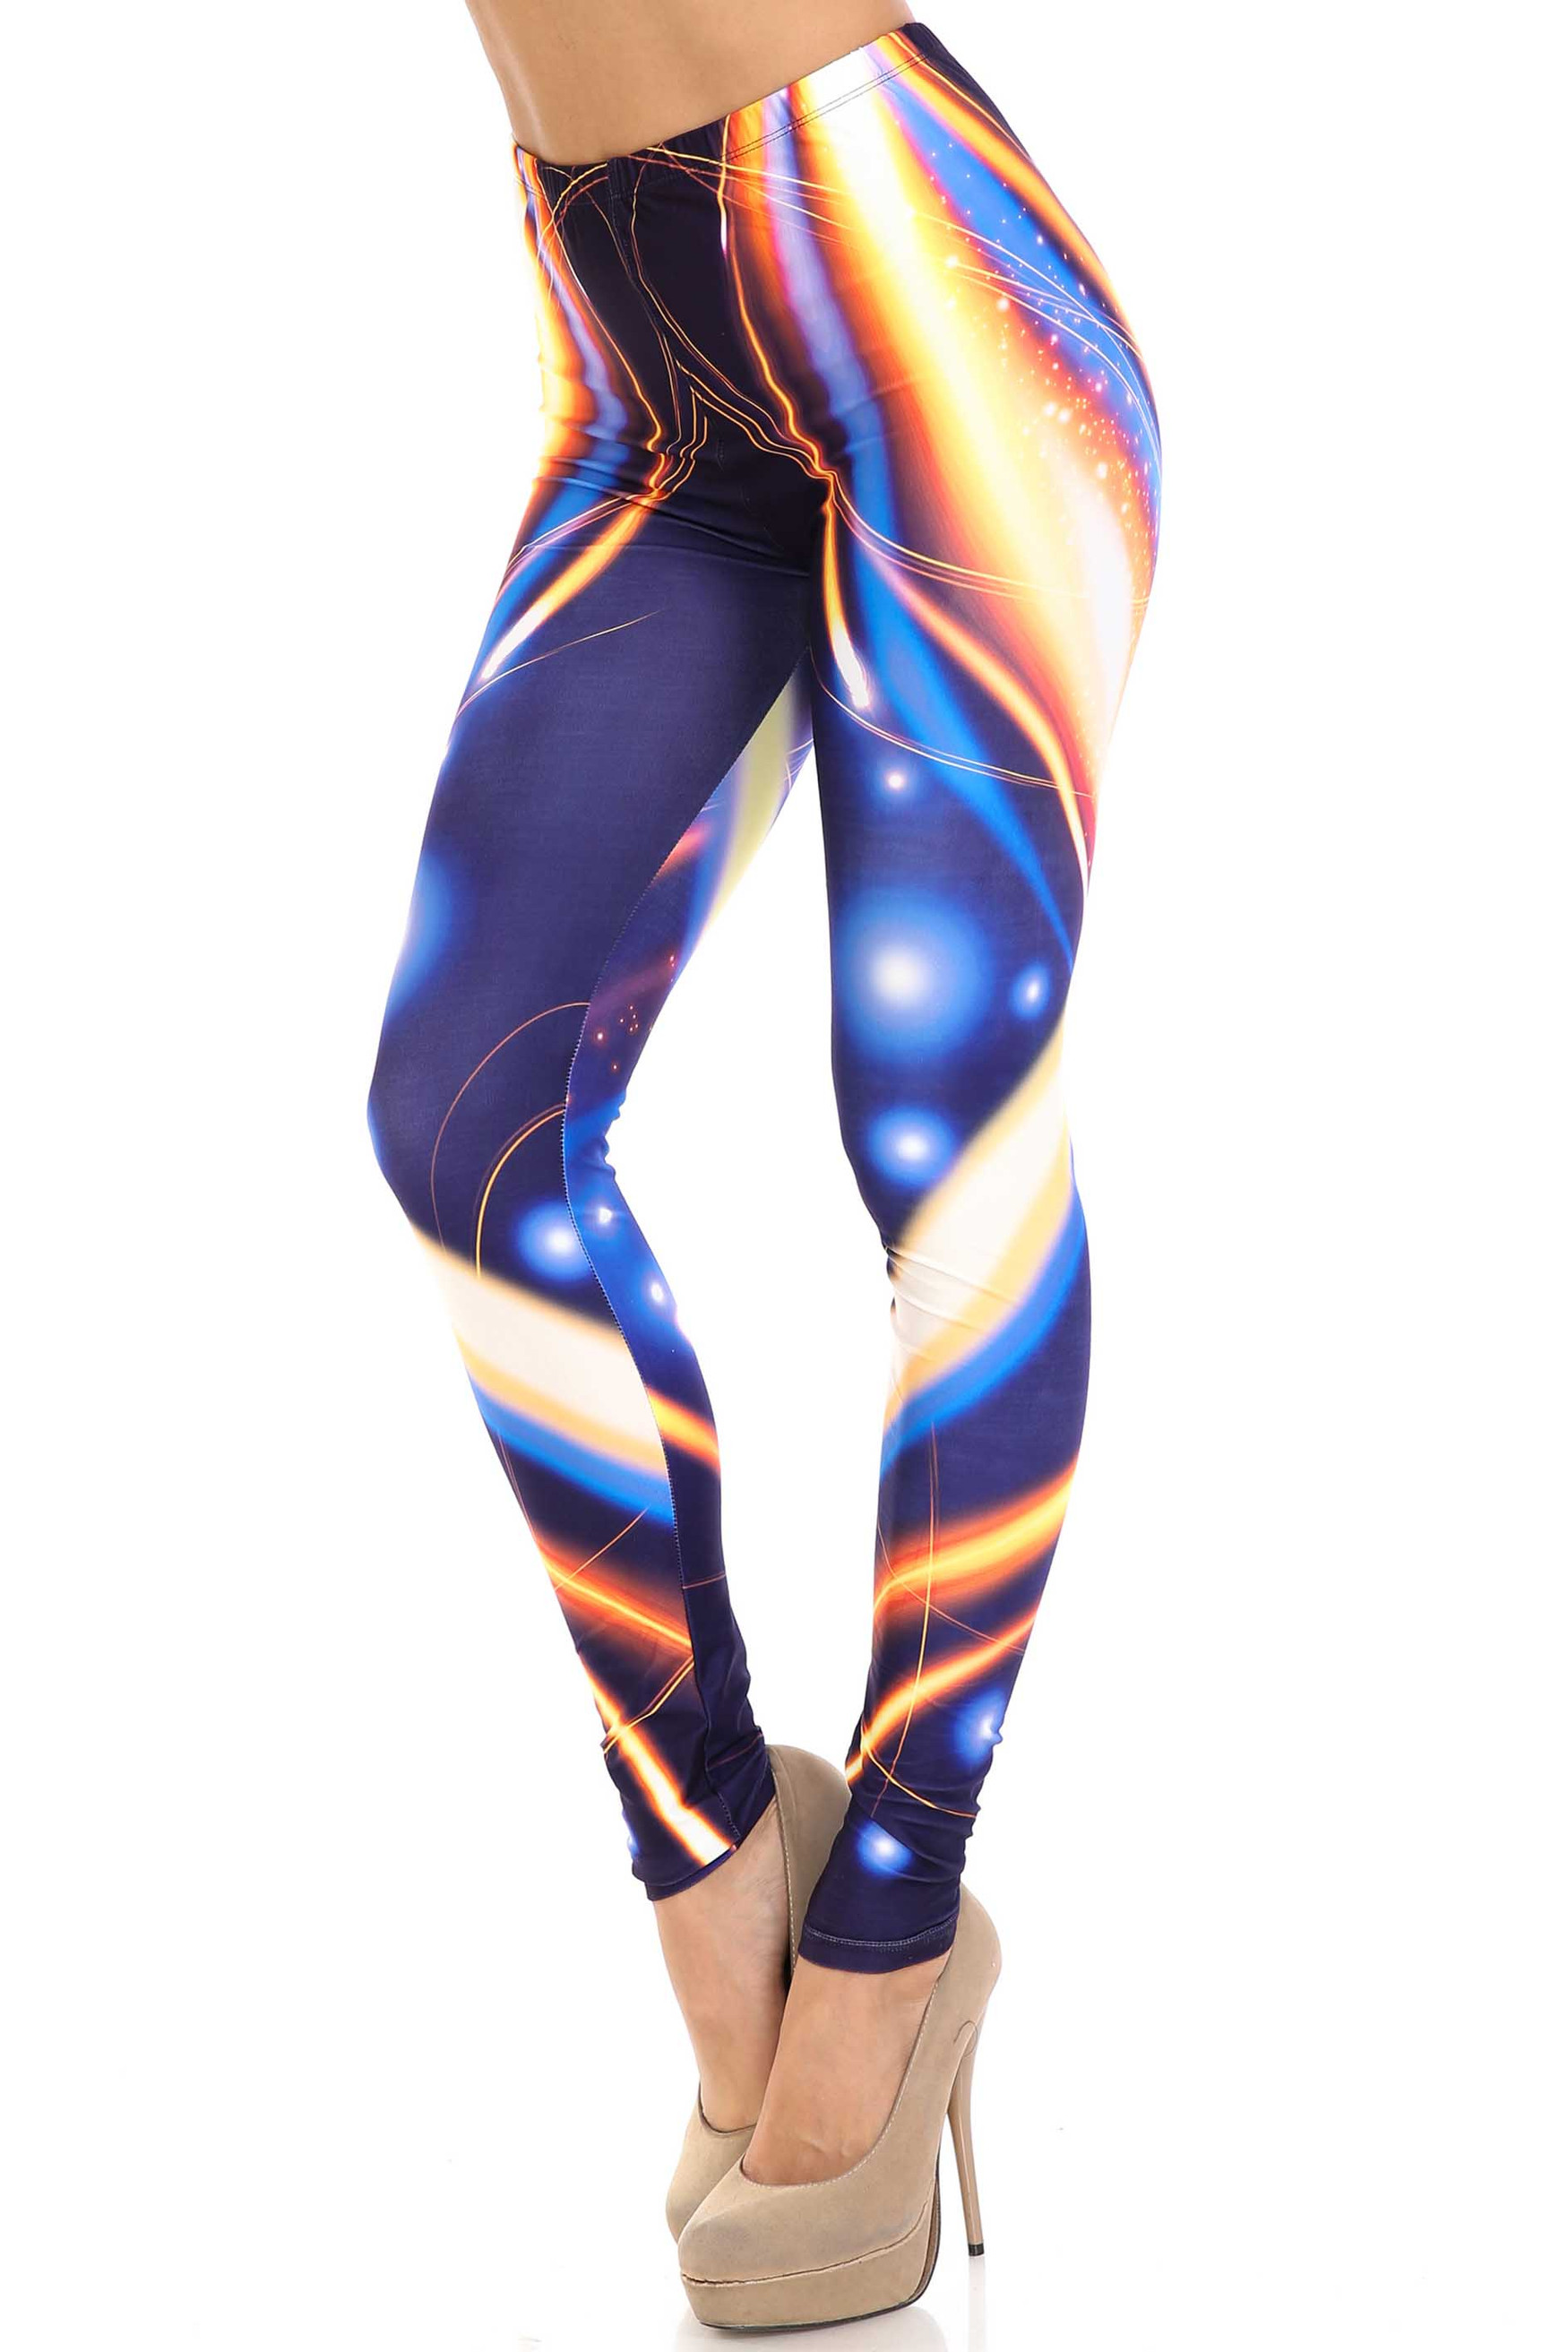 Creamy Soft Psychedelic Contour Extra Plus Size Leggings - 3X-5X - By USA Fashion™